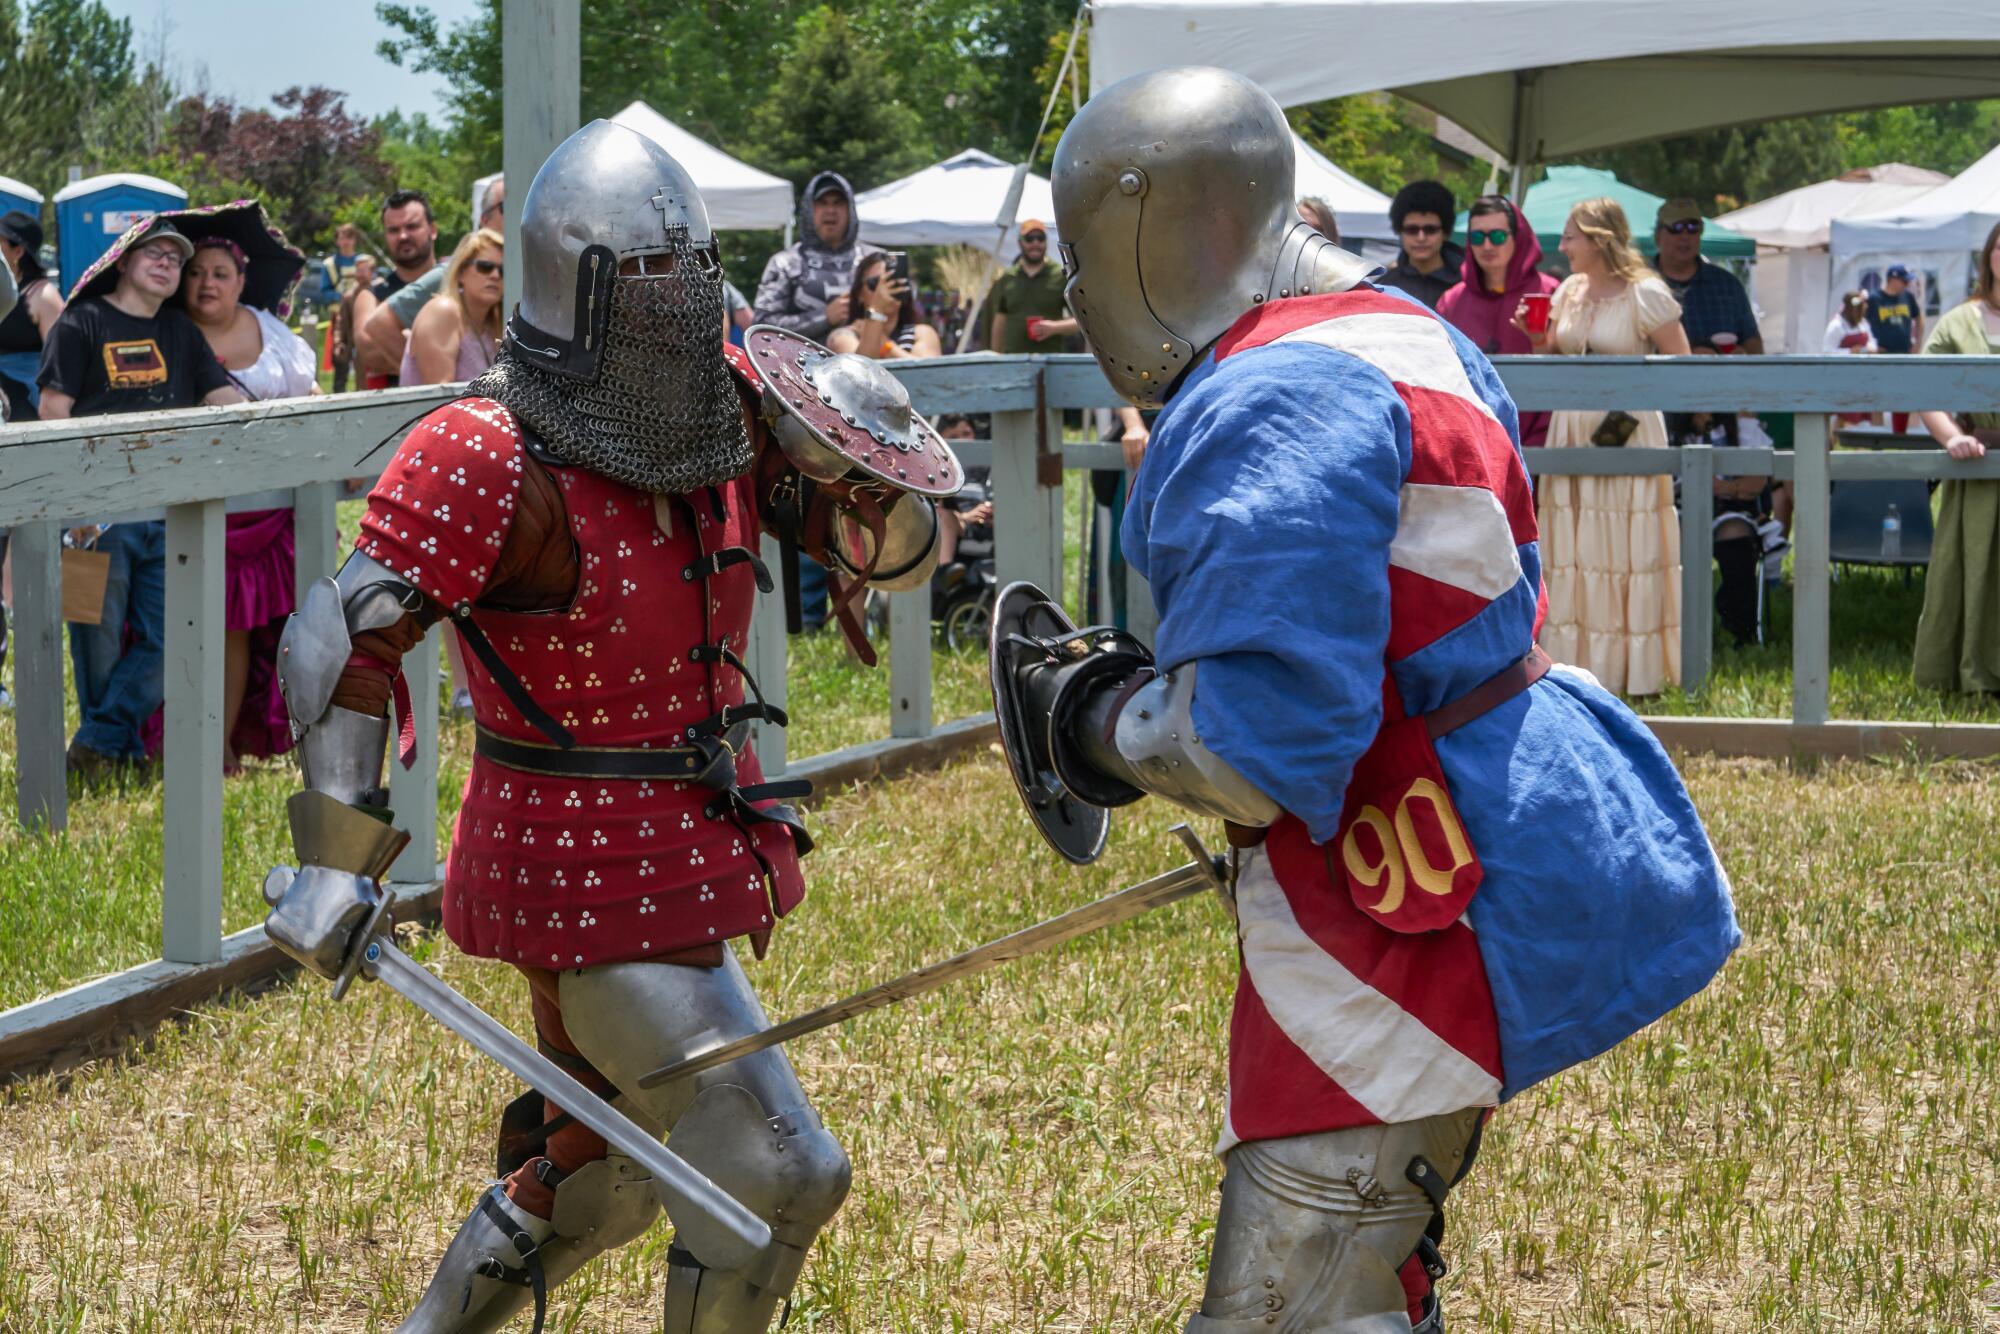 Two people in knight's armor, holding swords and shields, face off as a crowd watches 